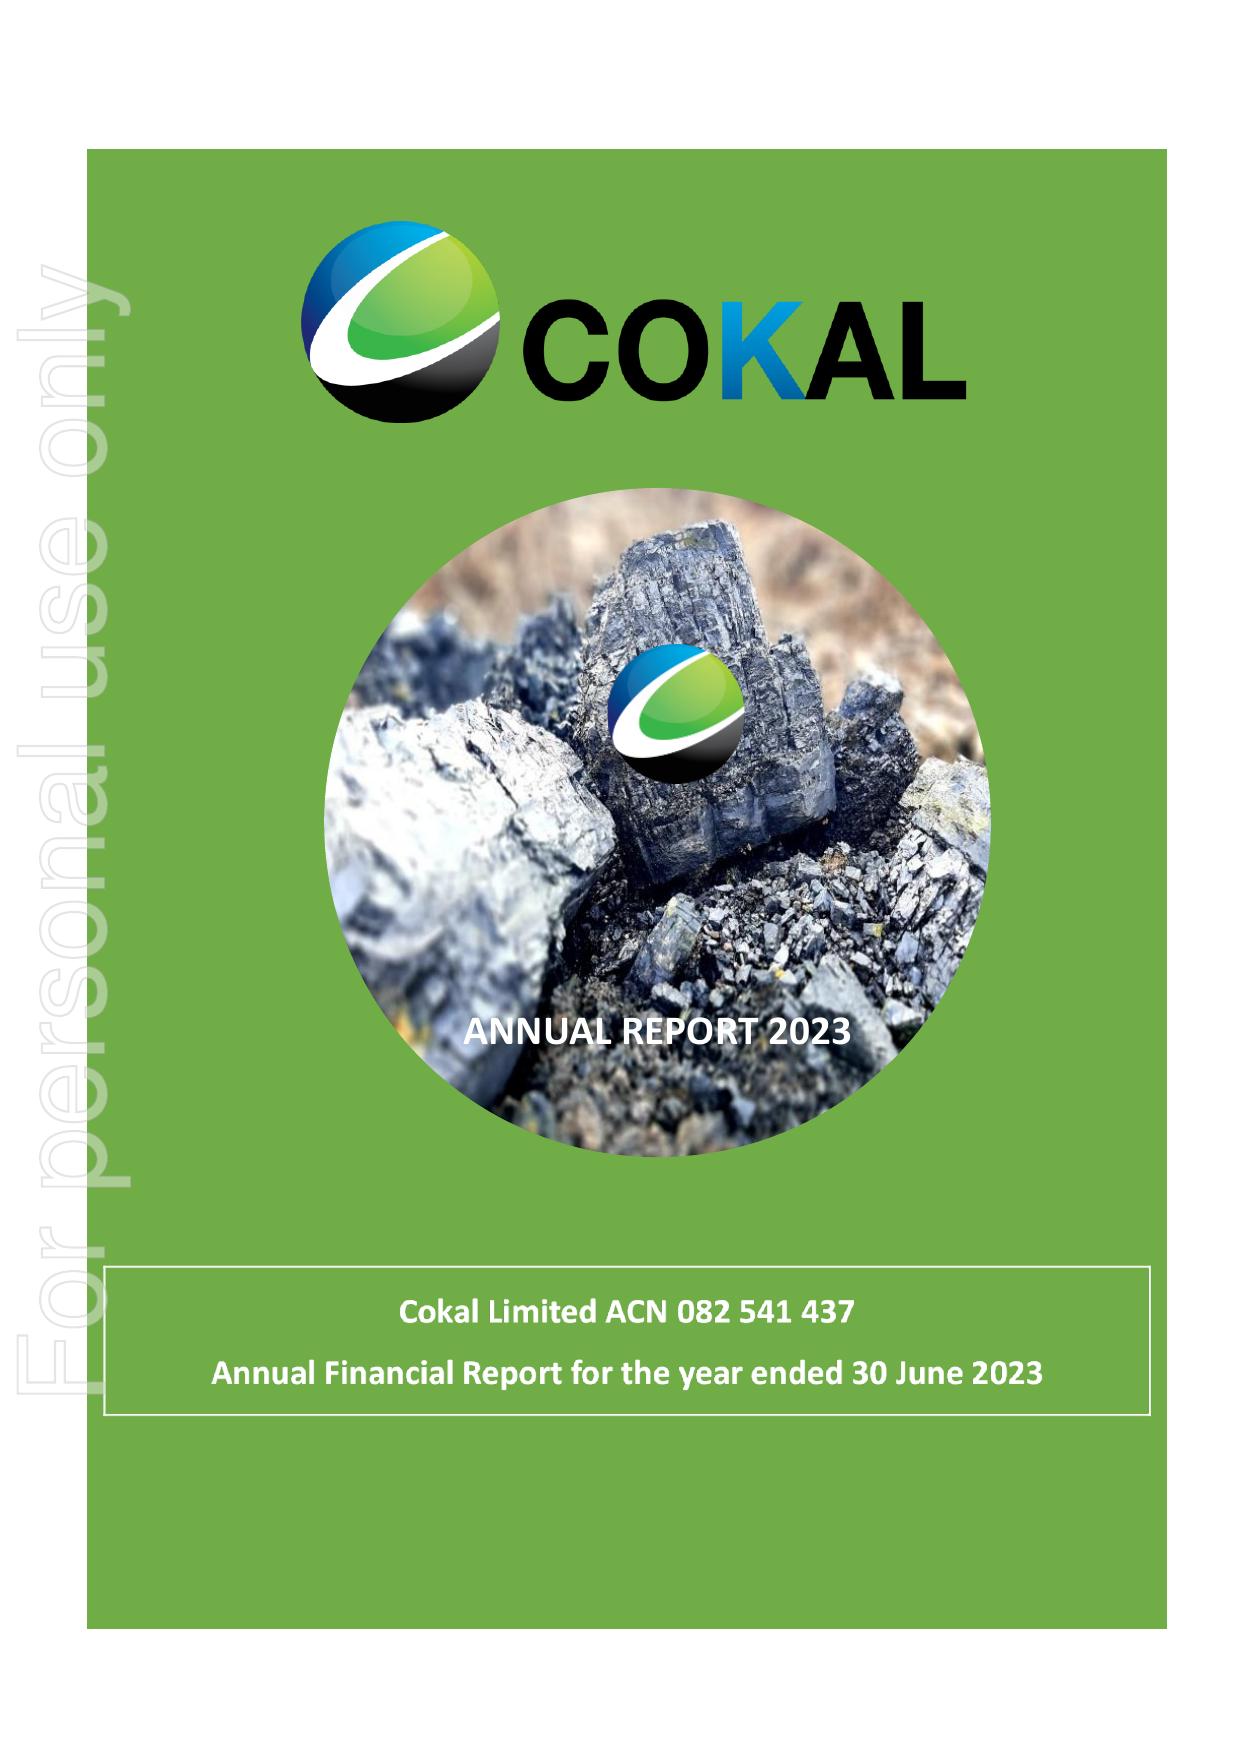 COKAL 2023 Annual Report